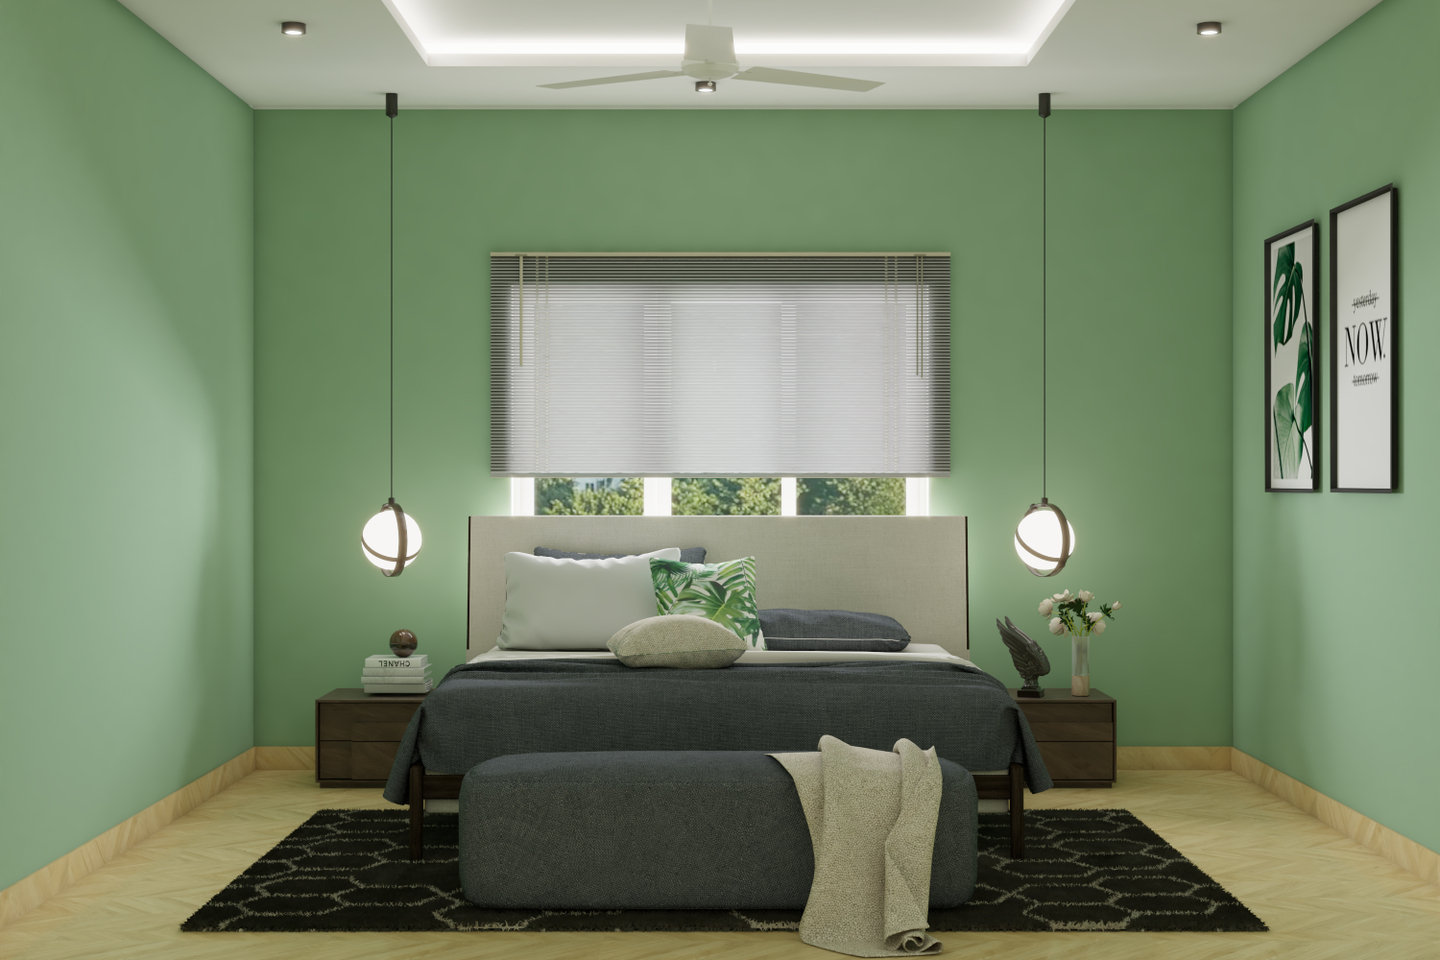 Contemporary Bedroom Design with Green Walls - Livspace